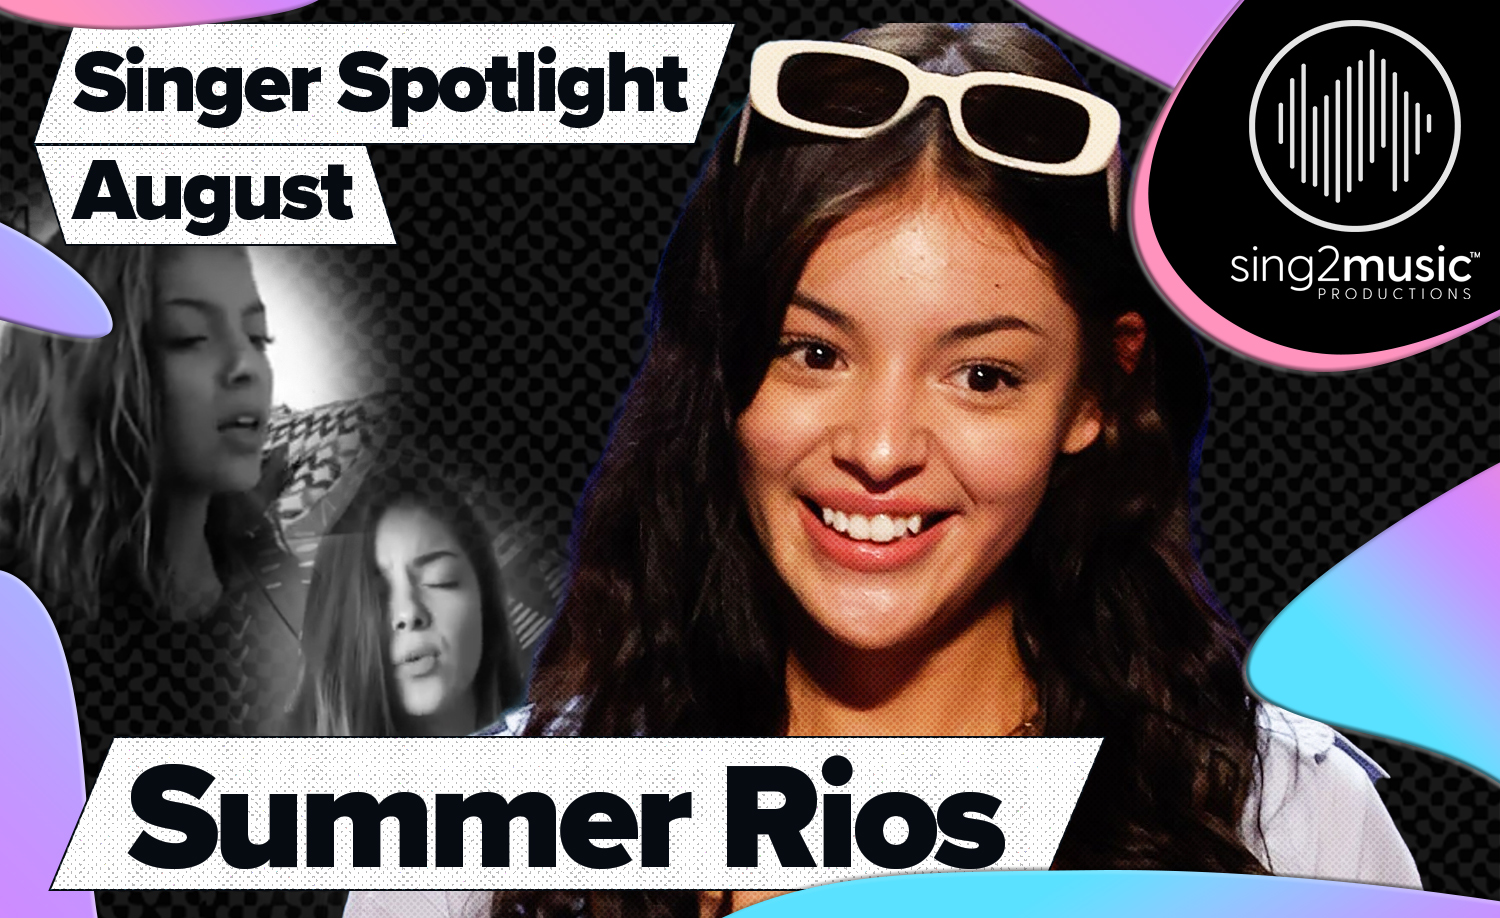 Summer Rios delivering a standout performance on America's Got Talent stage.